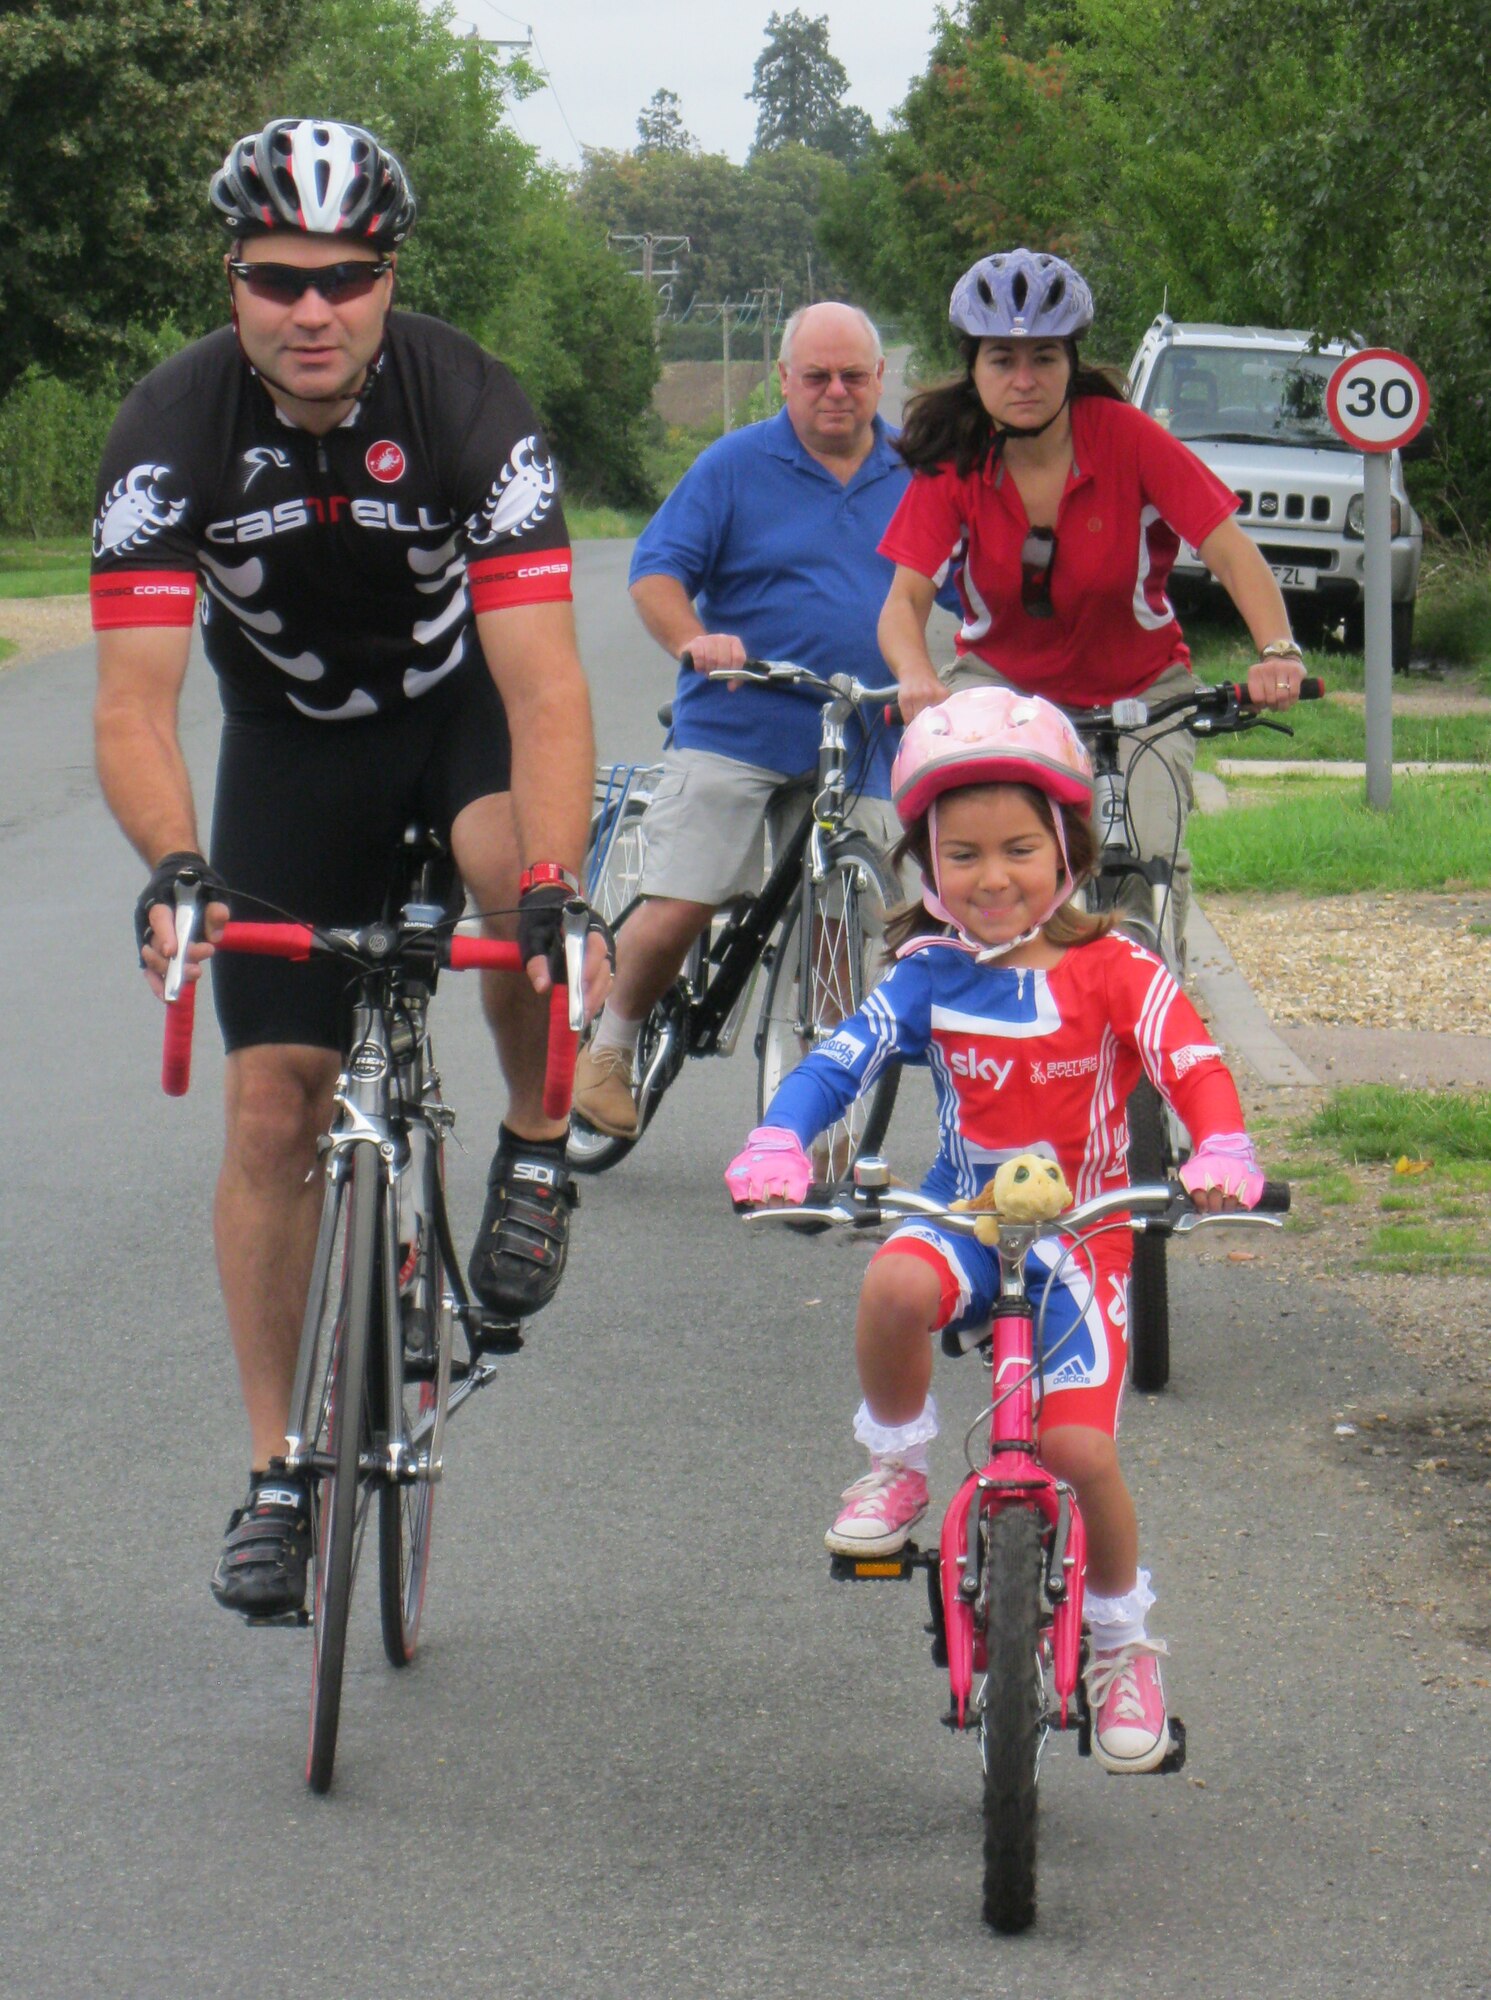 CHEVINGTON, England – (left to right) Tech. Sgt. Chad Cox, 748th Aircraft Maintenance Squadron resource advisor, rides with father-in-law, Michael Wilde, wife Catherine and 5-year-old daughter Anika during the Suffolk Historic Churches bike event, Sept. 10, 2011. Cox hopes to participate in the London to Paris bike event July 2012. (Courtesy photo by Valerie Wilde)